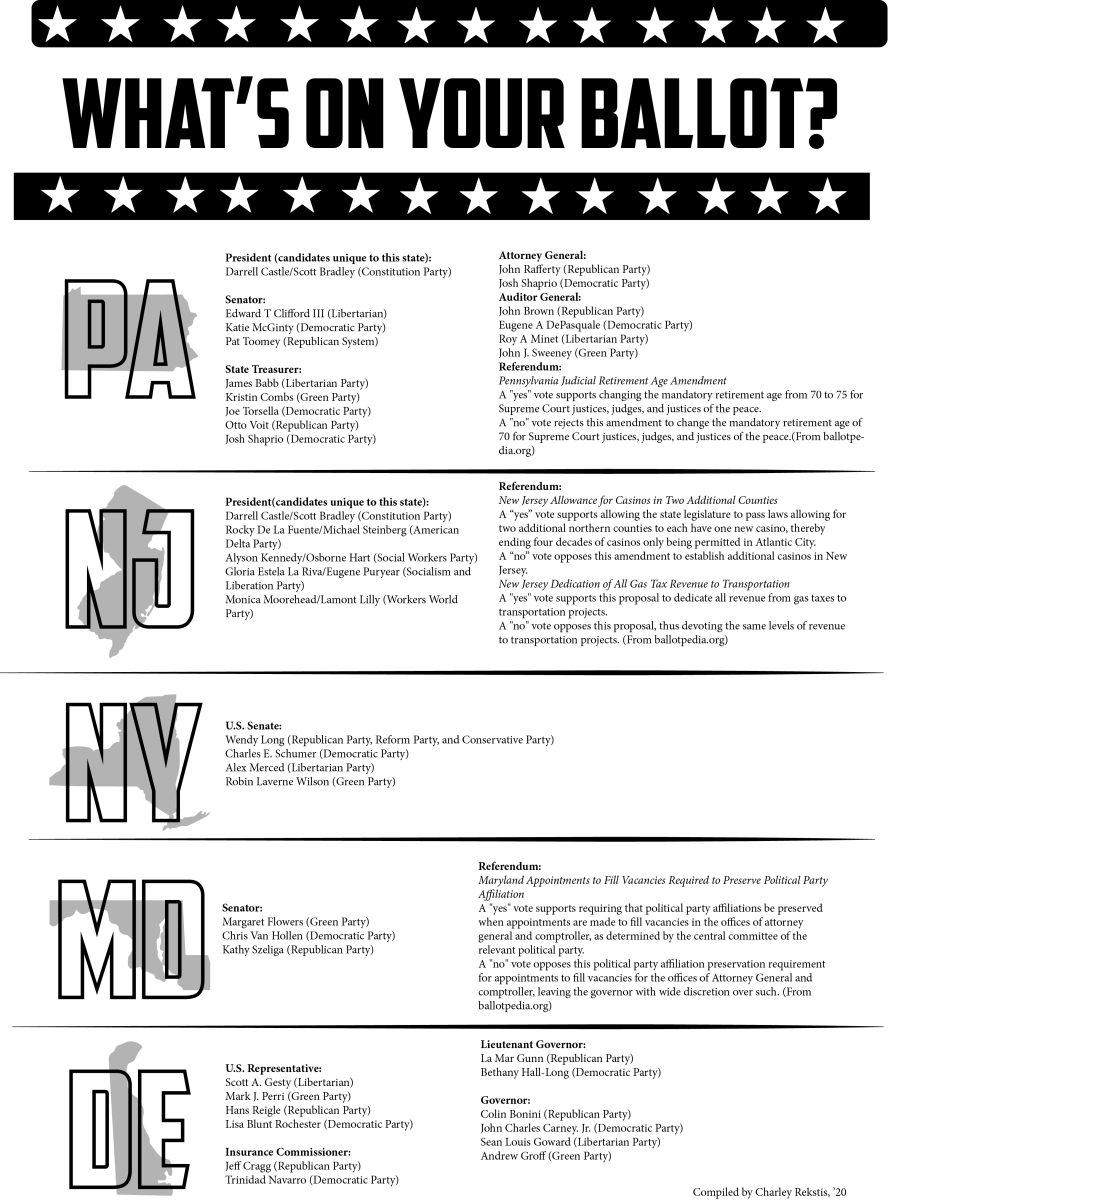 Whats+on+your+ballot%3F